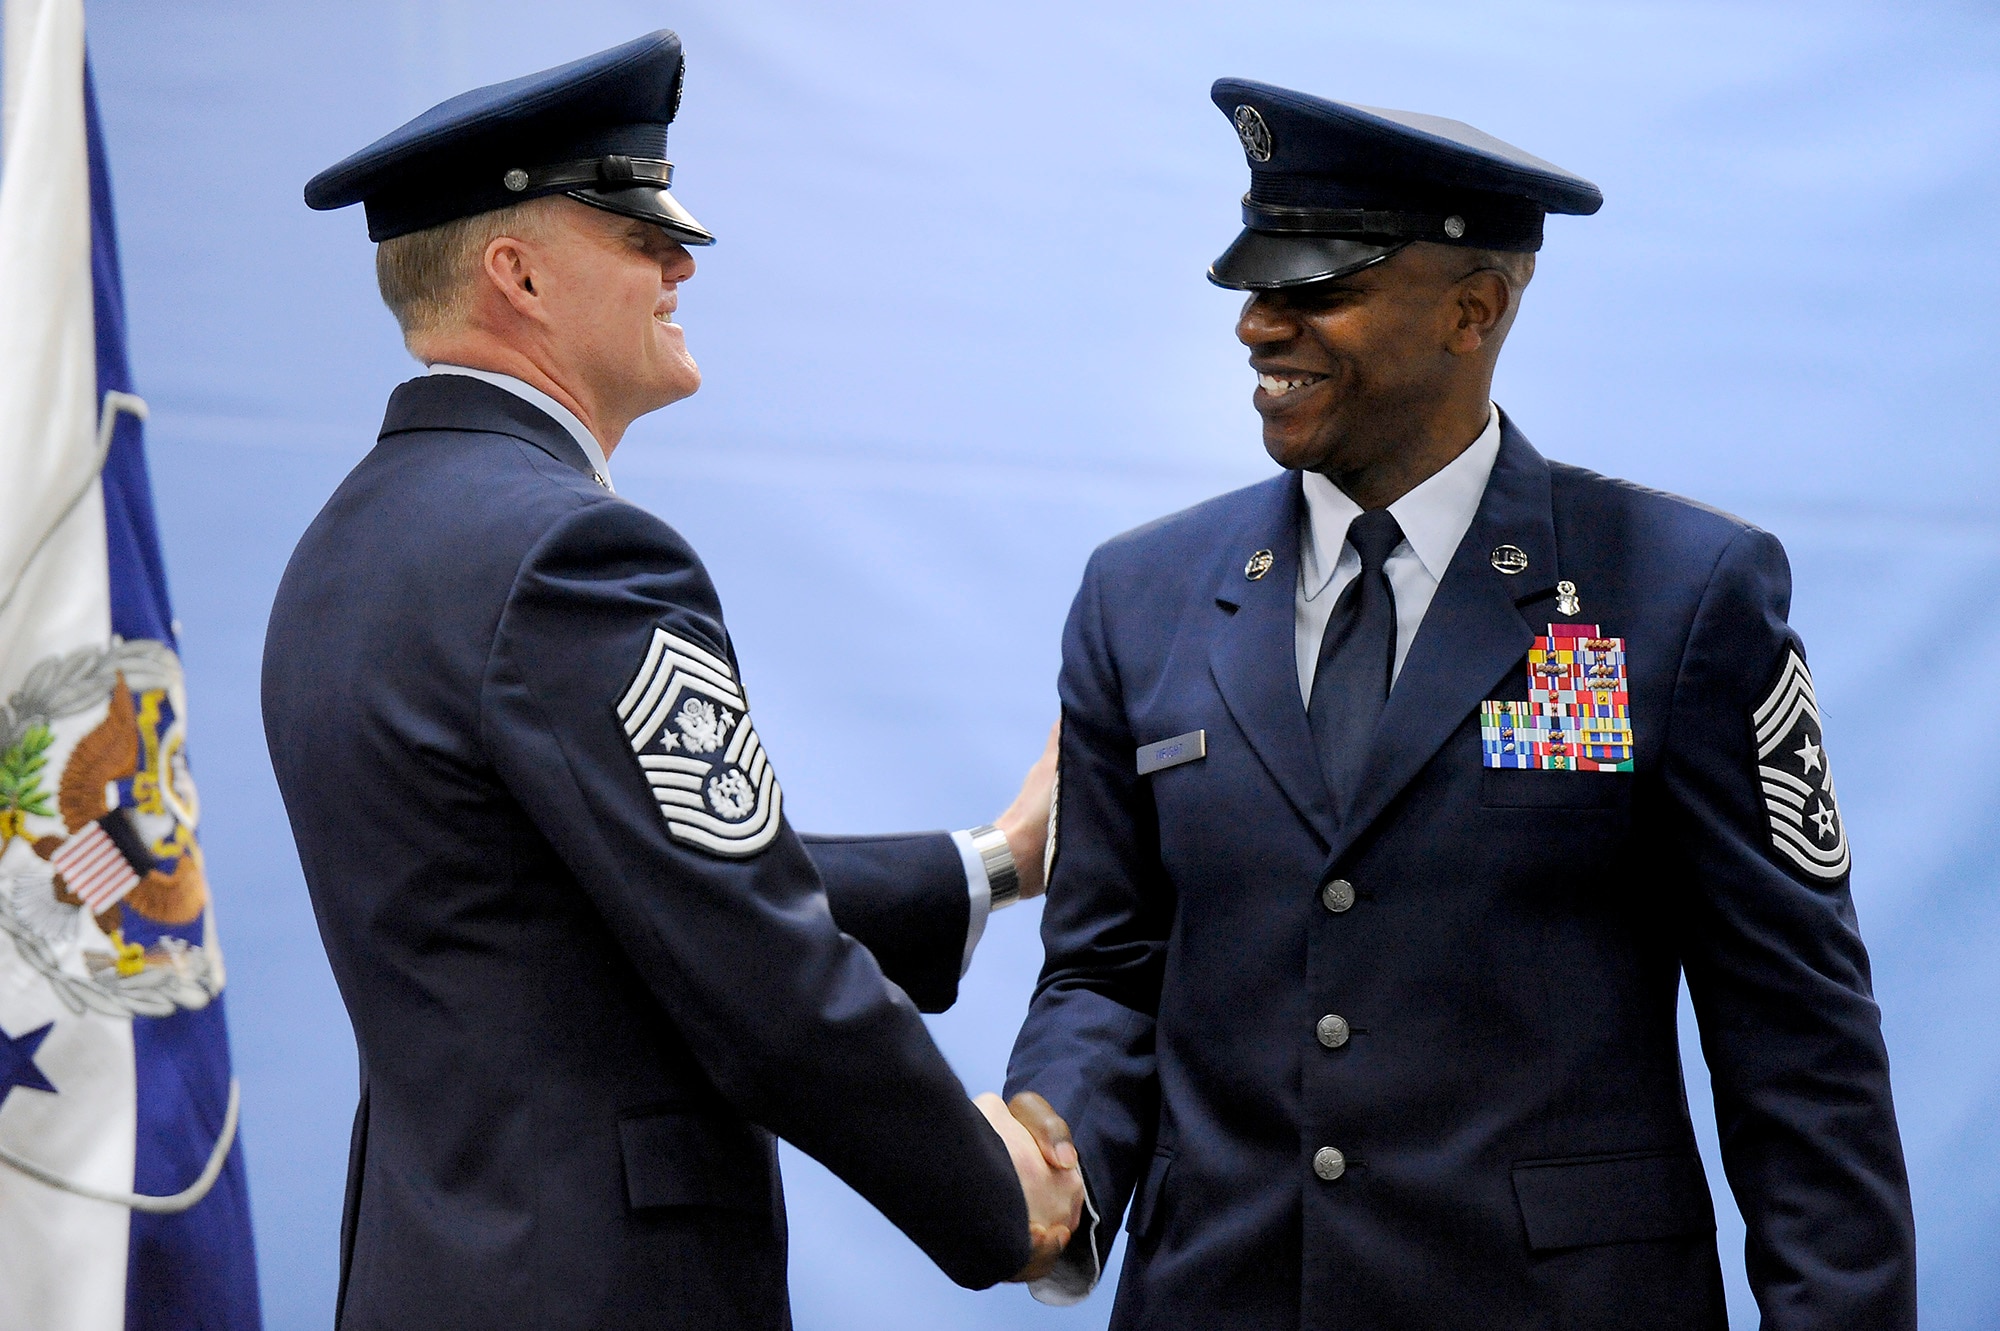 Chief Master Sgt. of the Air Force James A. Cody congratulates his successor, Chief Master Sgt. of the Air Force Kaleth O. Wright, during their retirement and appointment ceremony on Joint Base Andrews, Md., Feb. 17, 2017. Wright succeeds Chief Master Sgt. of the Air Force James A. Cody, who retires after 32 years of service, and he is the 18th Airman to hold this position. (U.S. Air Force photo/Tech. Sgt. Robert Barnett)